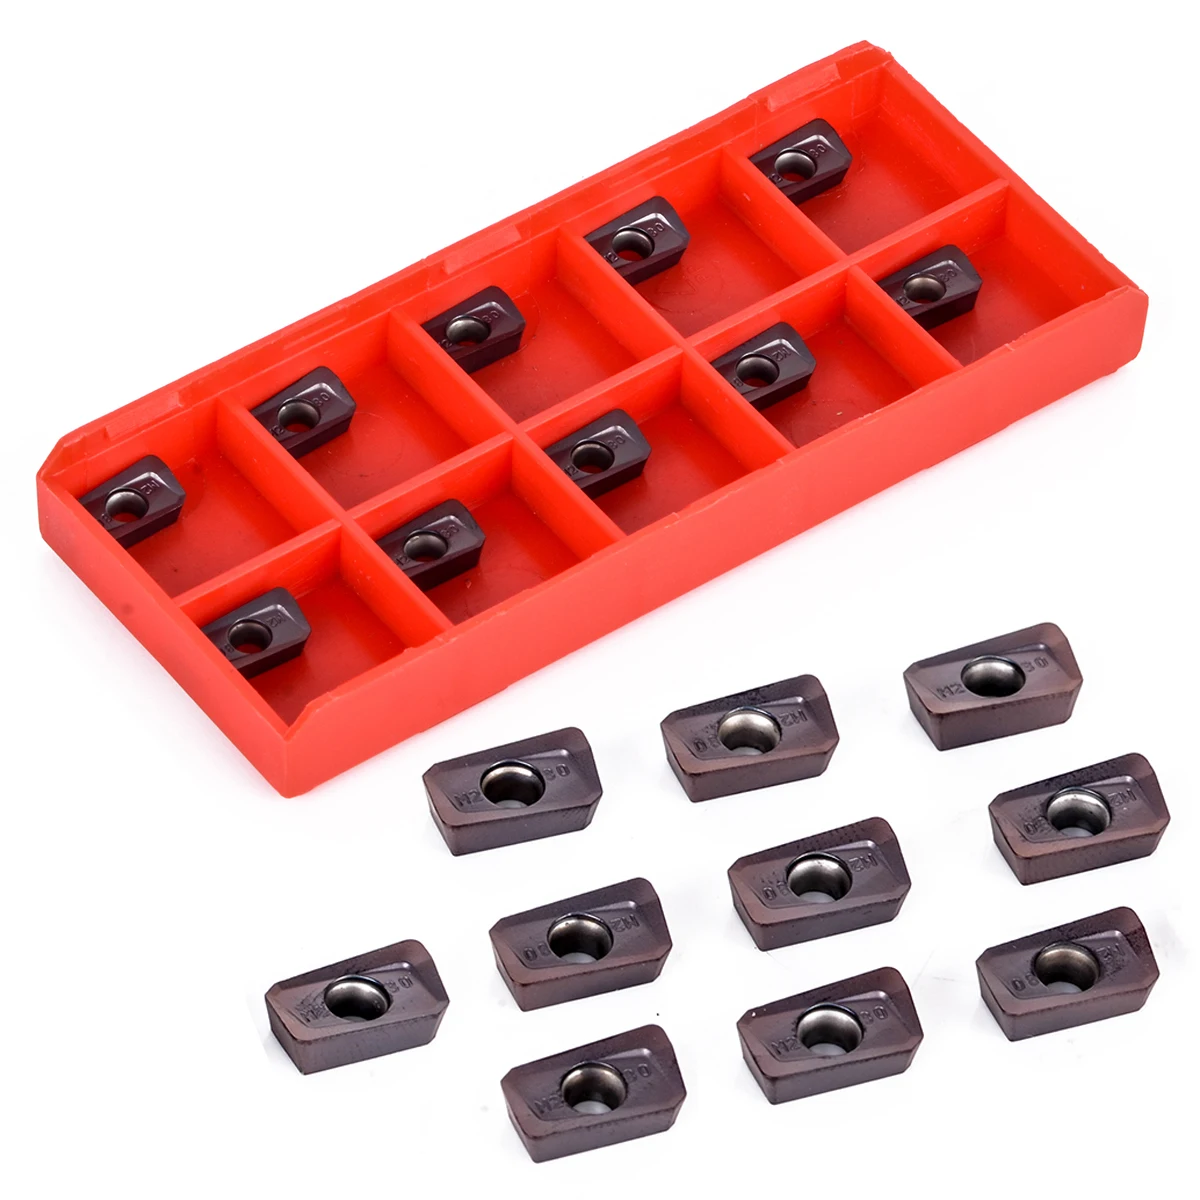 1pc BAP 300R C10-10-100 Tool Holder + 10pcs APMT1135PDER Carbide Inserts with Wrench For CNC Milling Tool